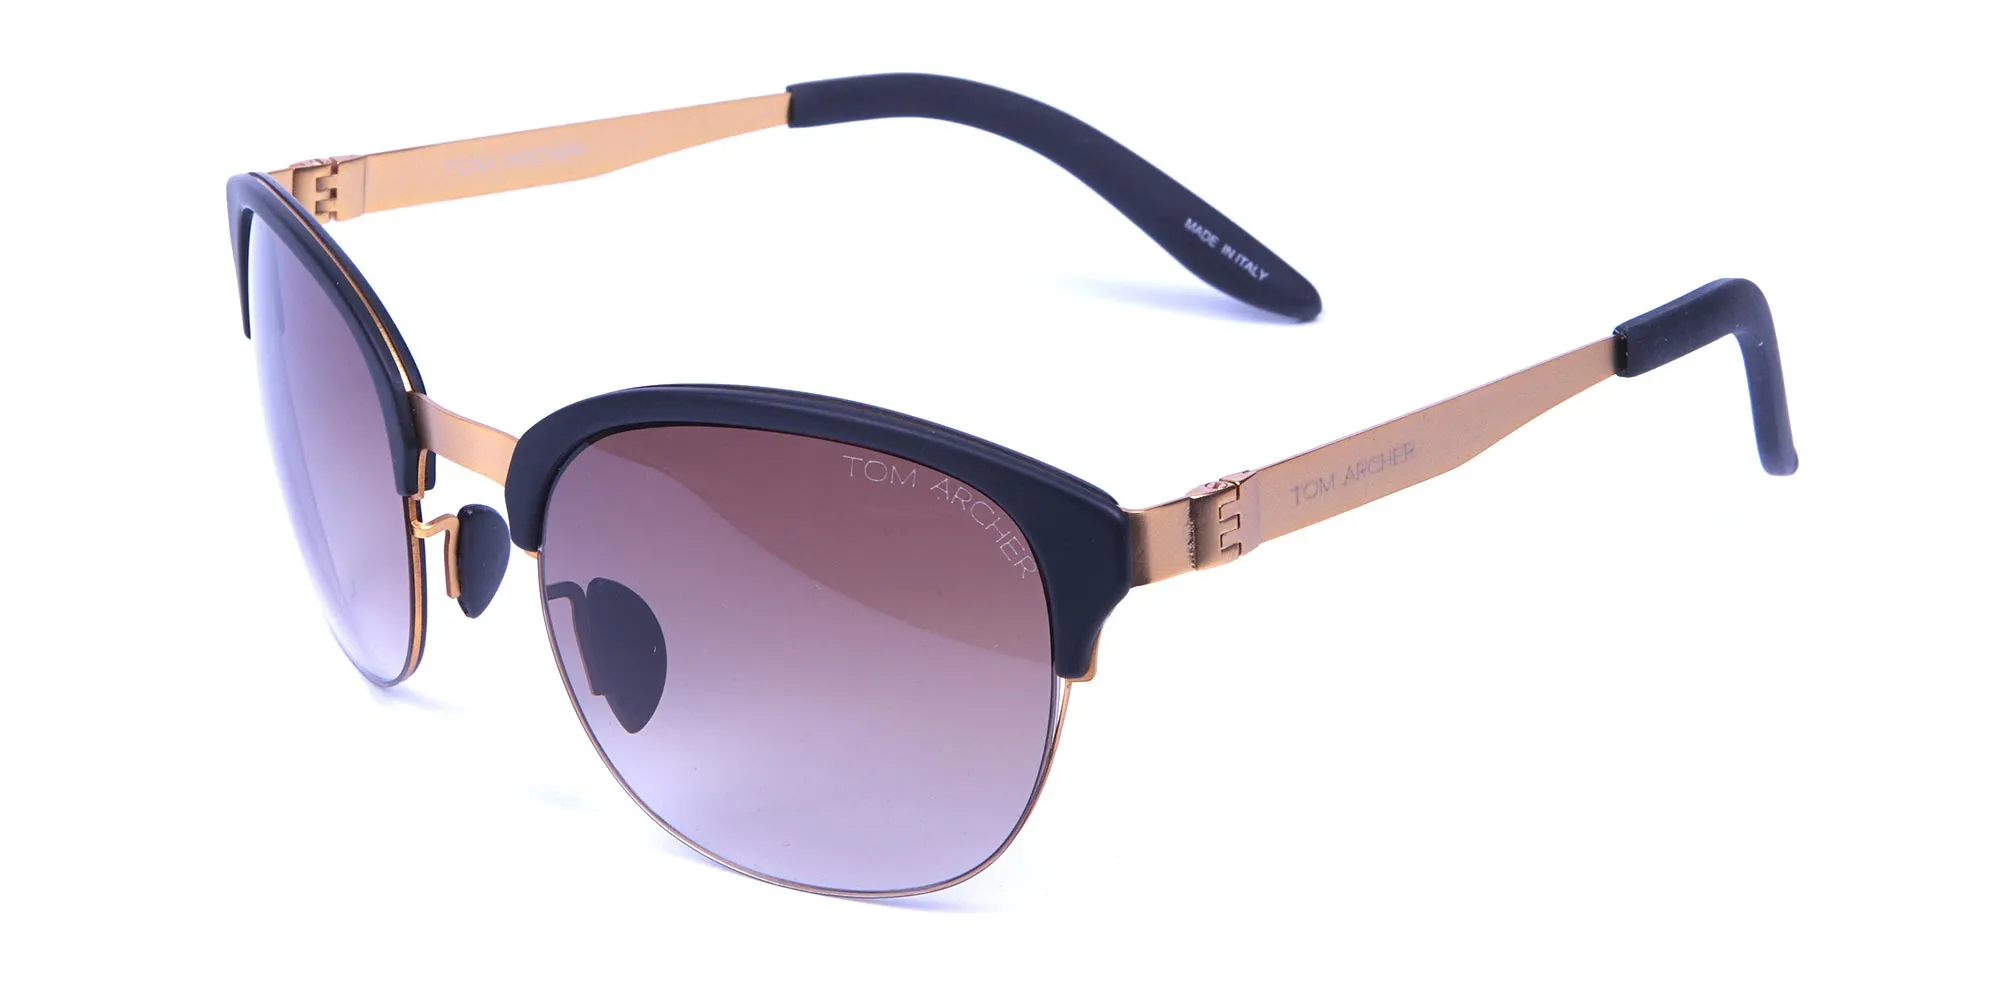 Gold Frame Sunglasses with Black Accents -1